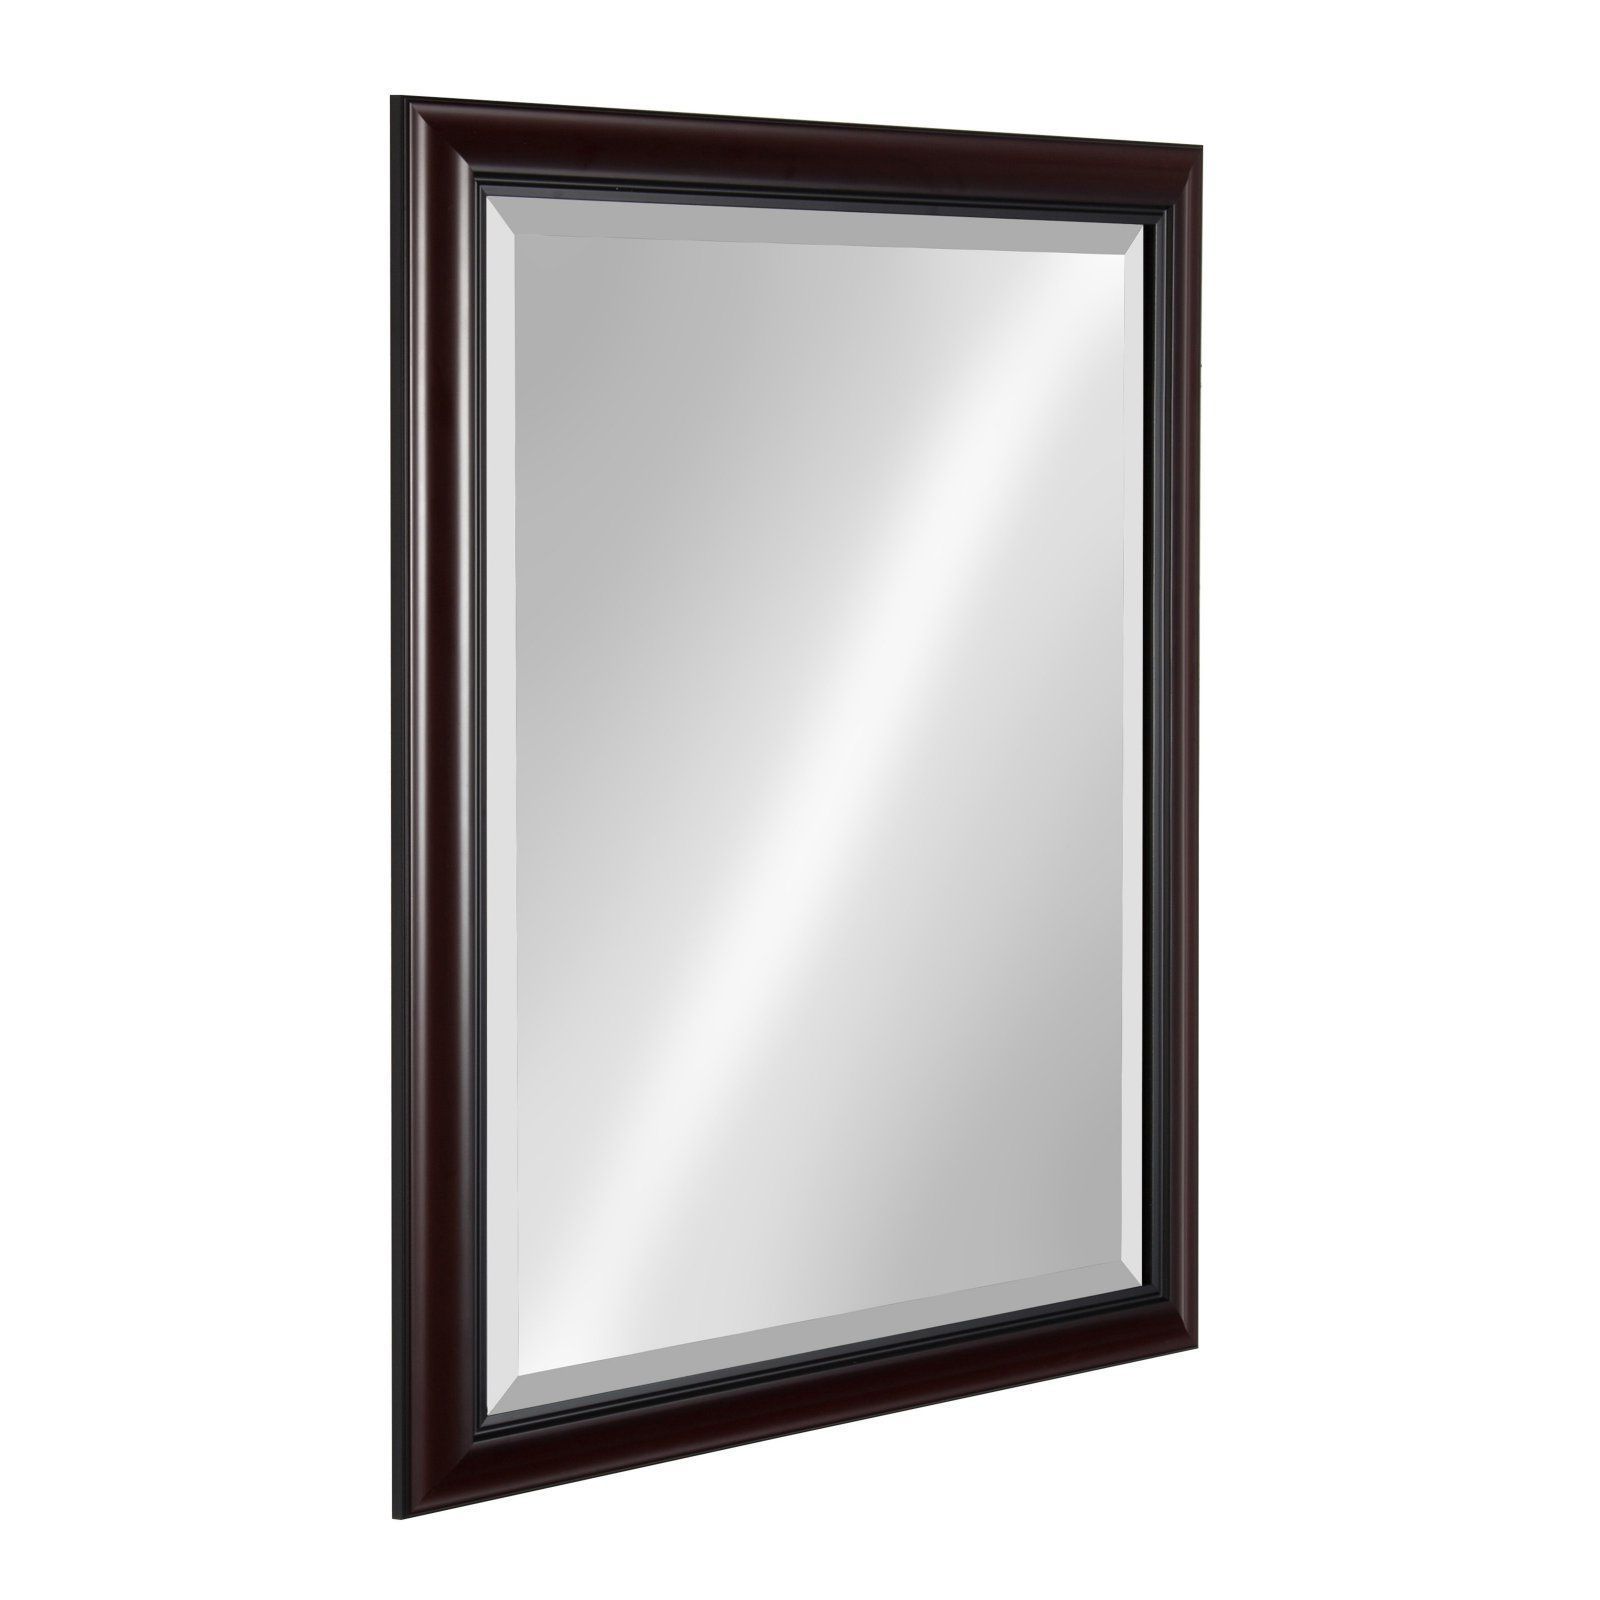 Kate And Laurel Dalat Framed Beveled Wall Mirror Cherry, #beveled # Throughout Cut Corner Frameless Beveled Wall Mirrors (View 15 of 15)